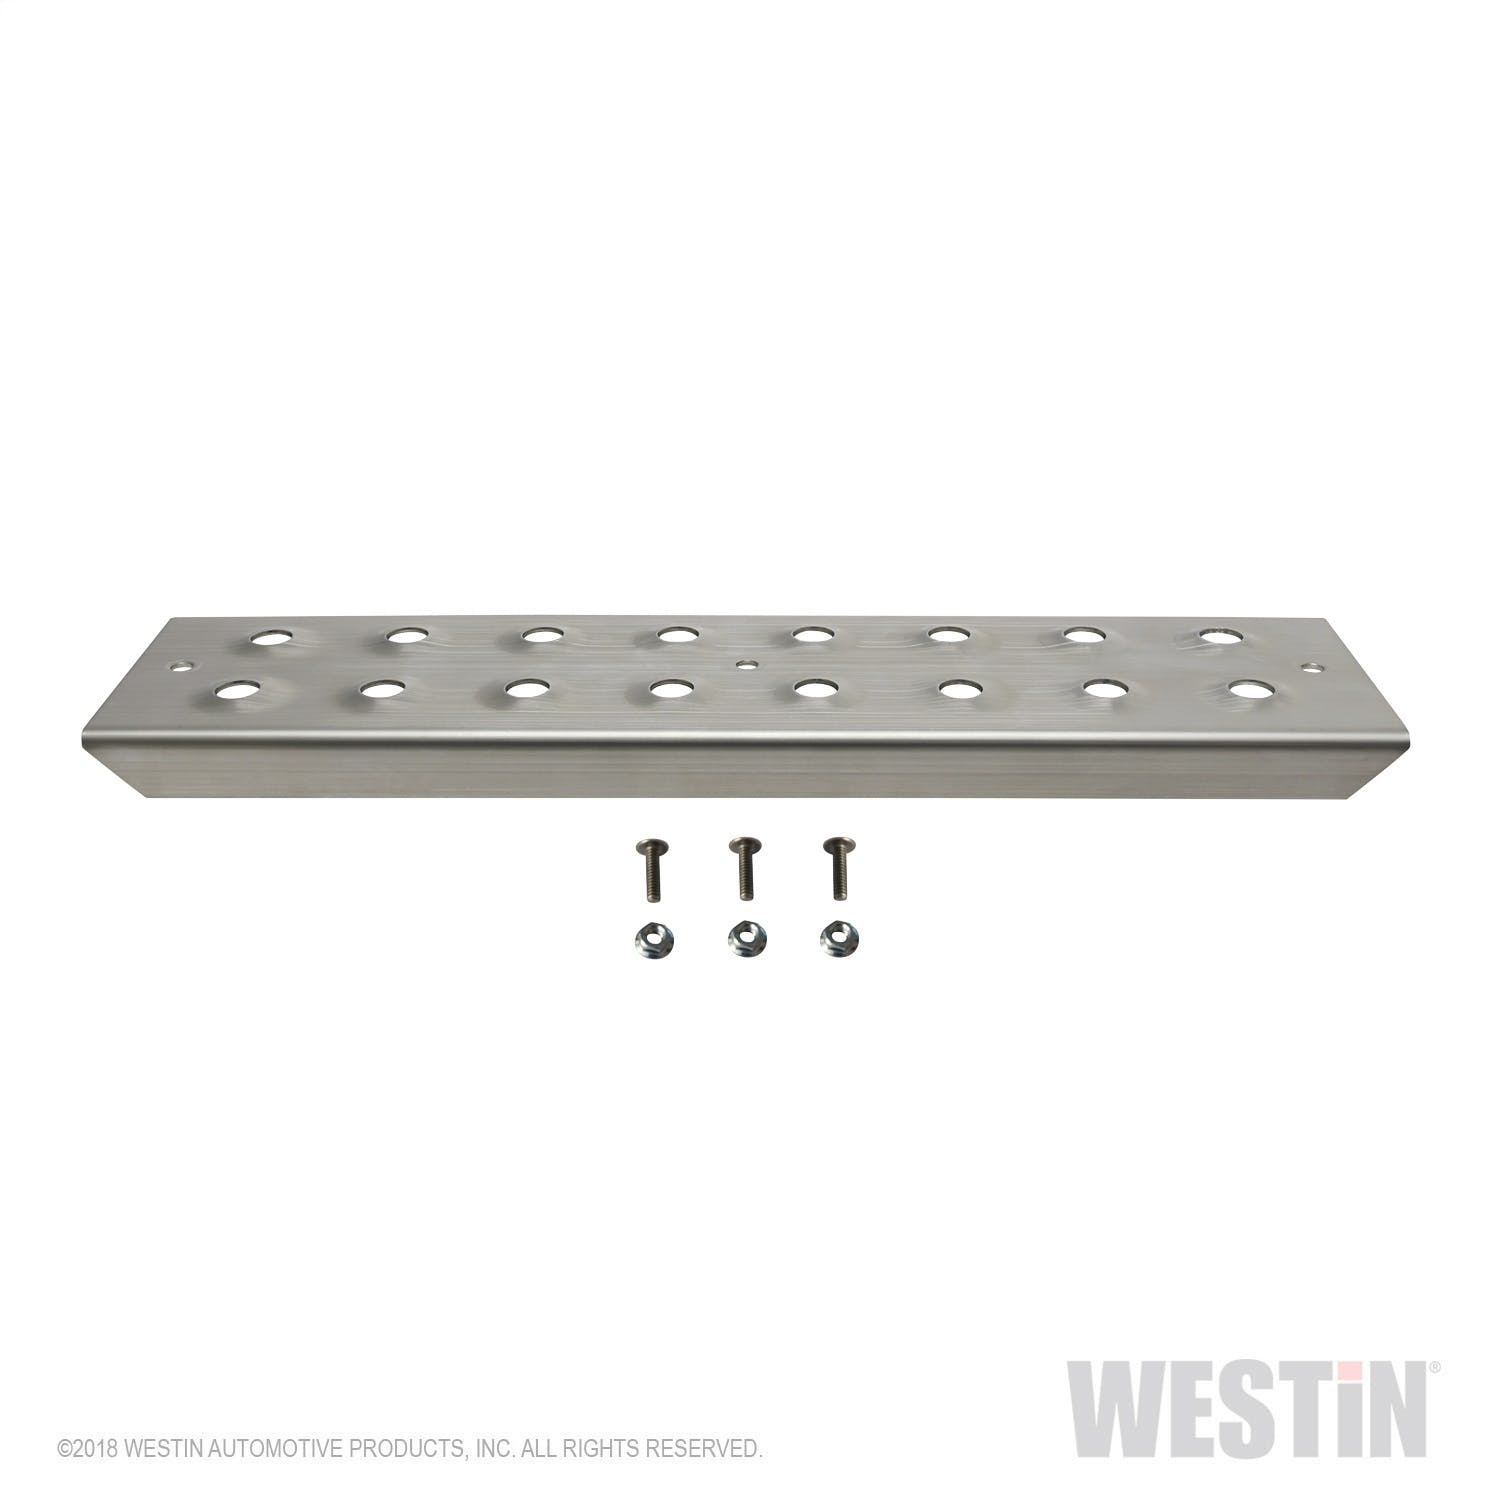 Westin Automotive 56-100015 HDX Stainless Drop Step Plate Replacement Kit Stainless Steel